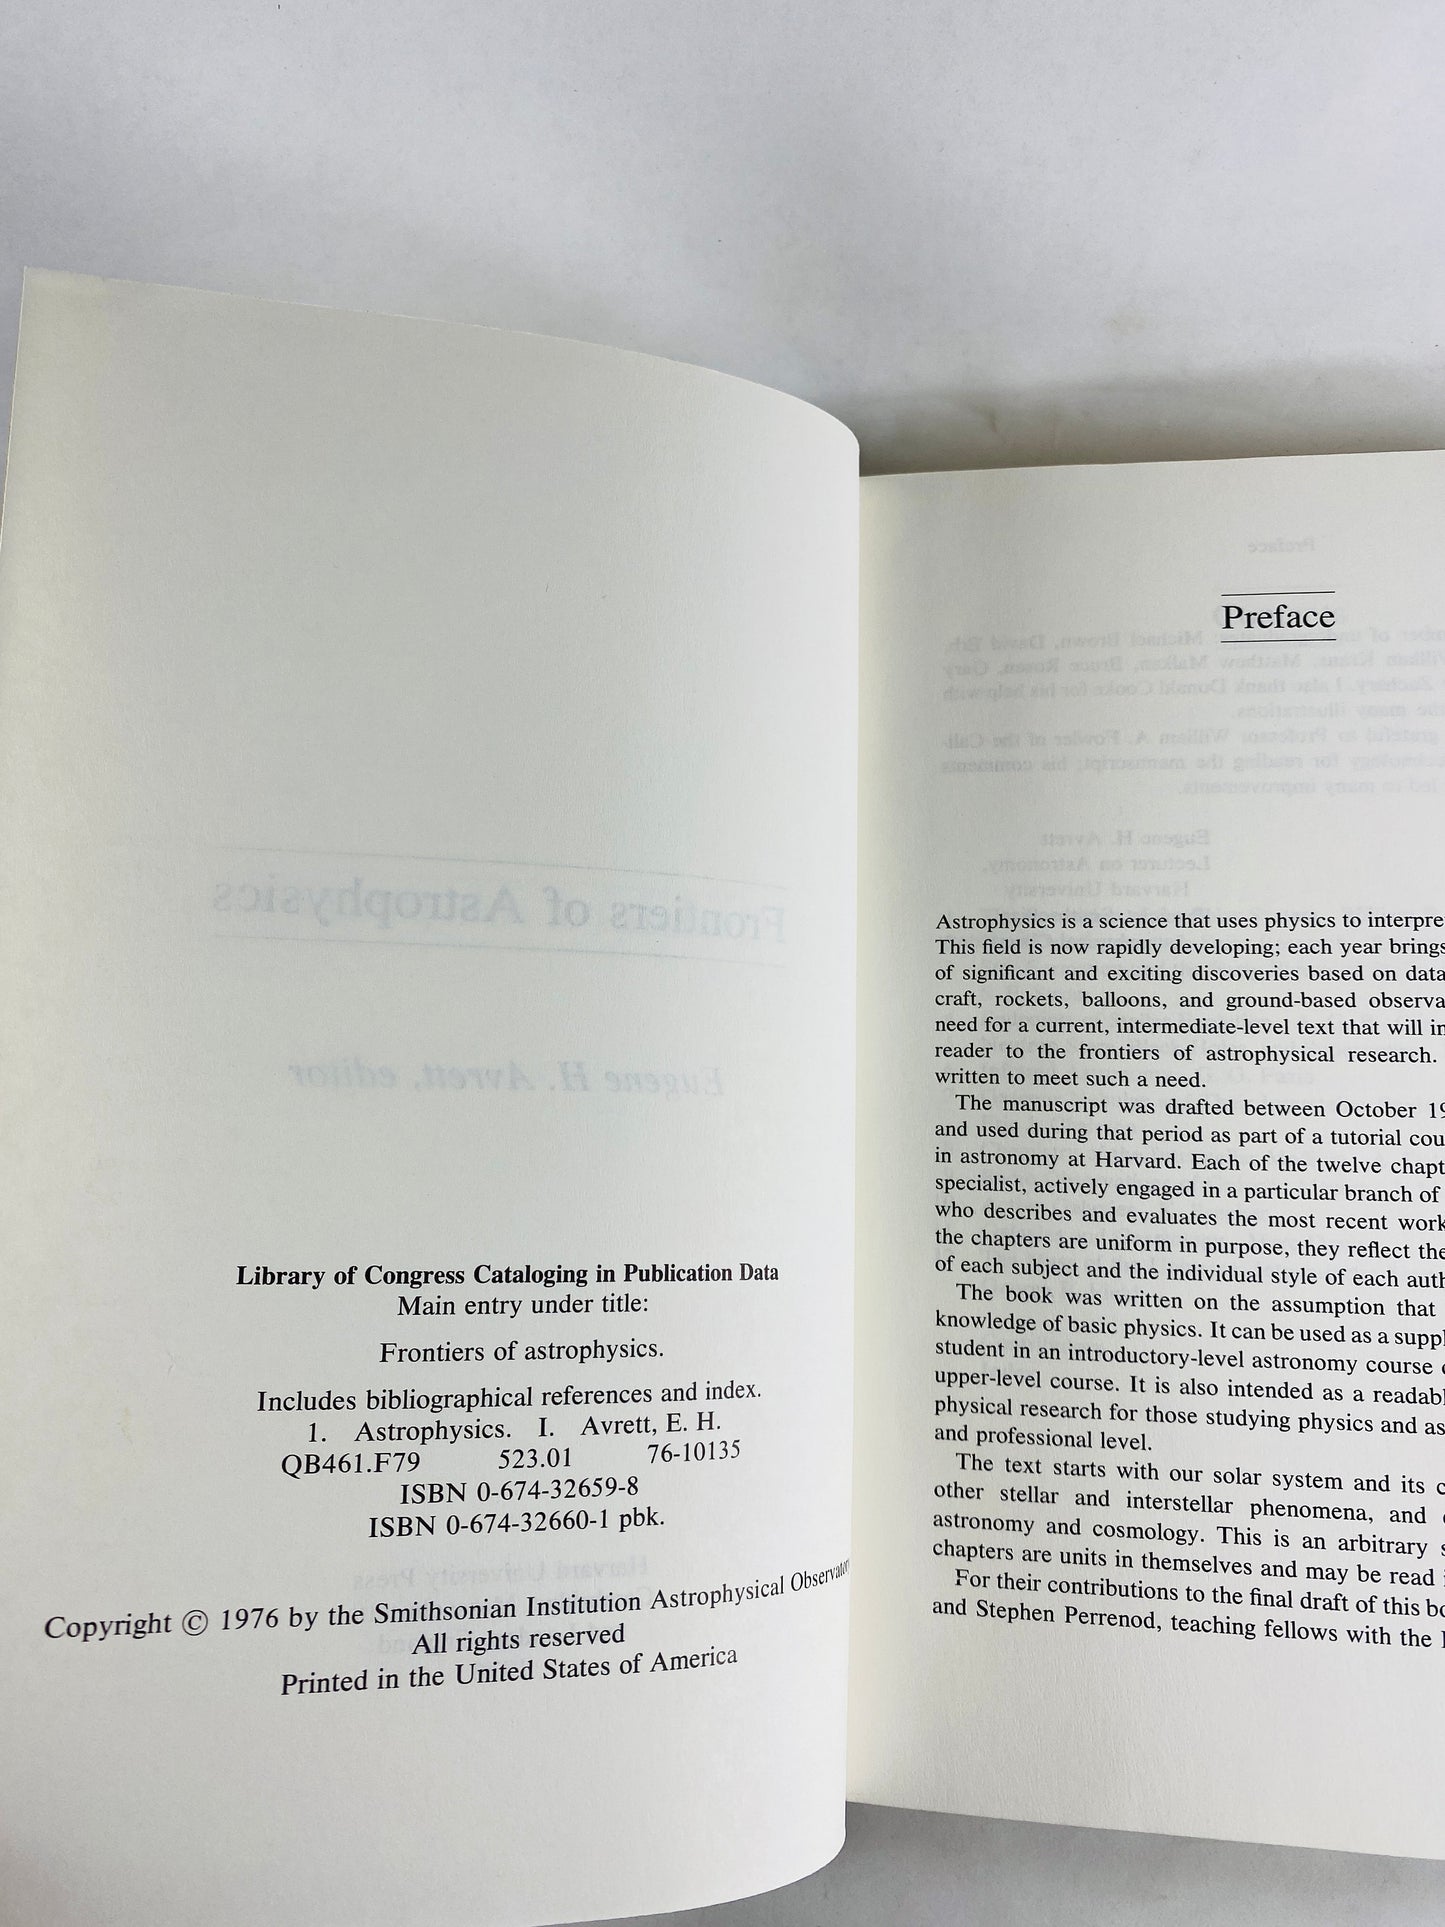 Frontiers of Astrophysics vintage book by Eugene Avrett circa 1976 Solar System Galactic Masers Cosmology Philosophy Quantum phenomena